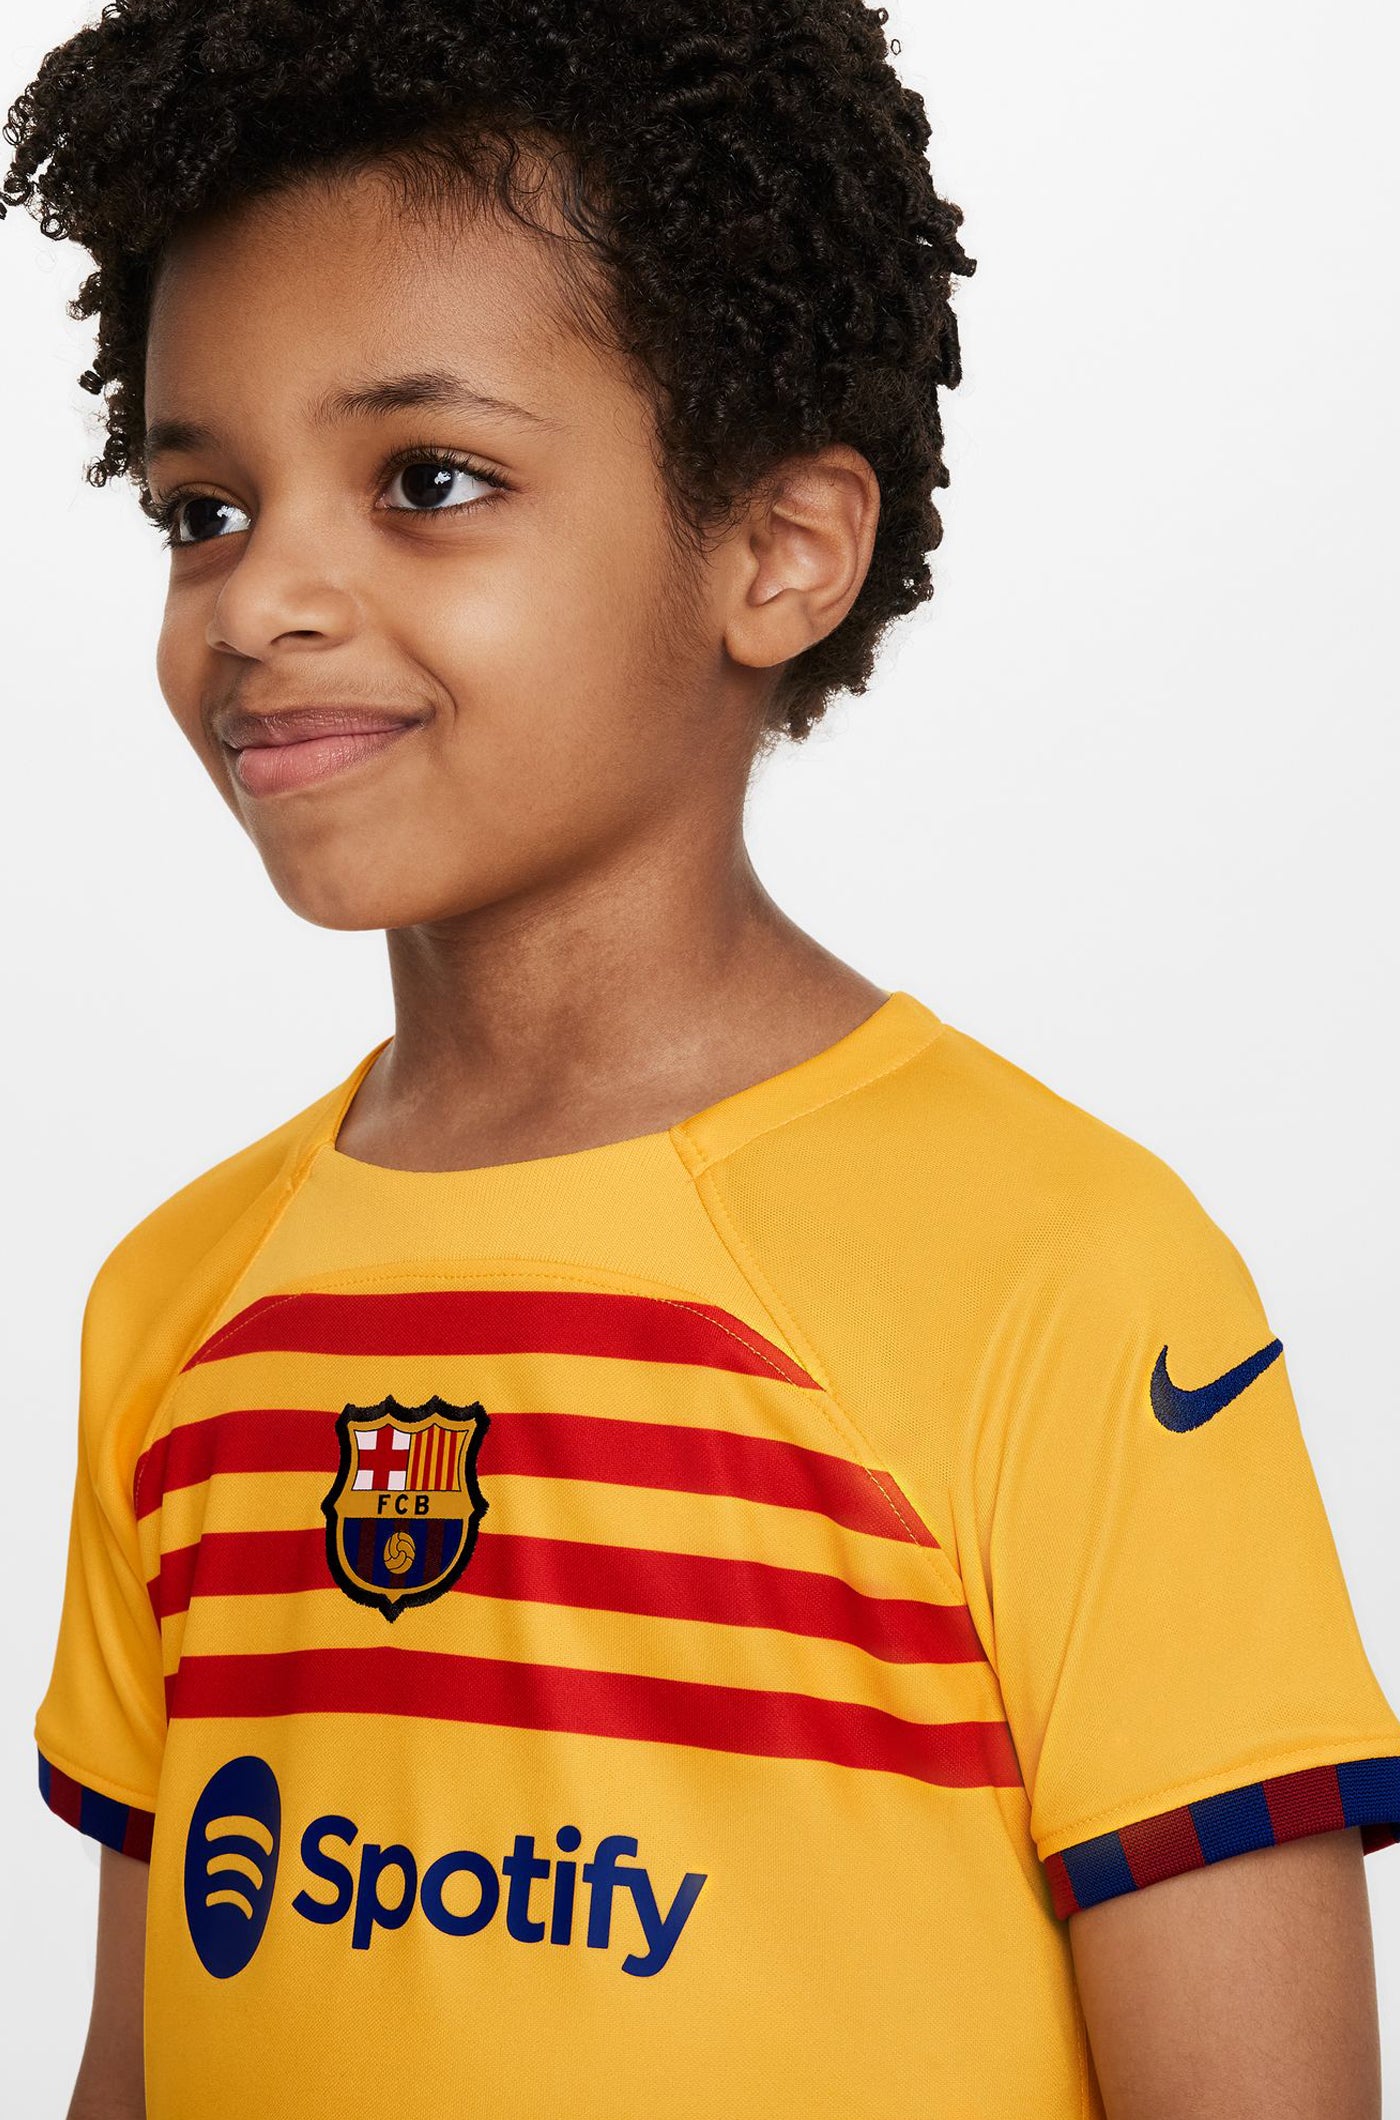 FC Barcelona fourth Kit 23/24 – Younger Kids  - PINA